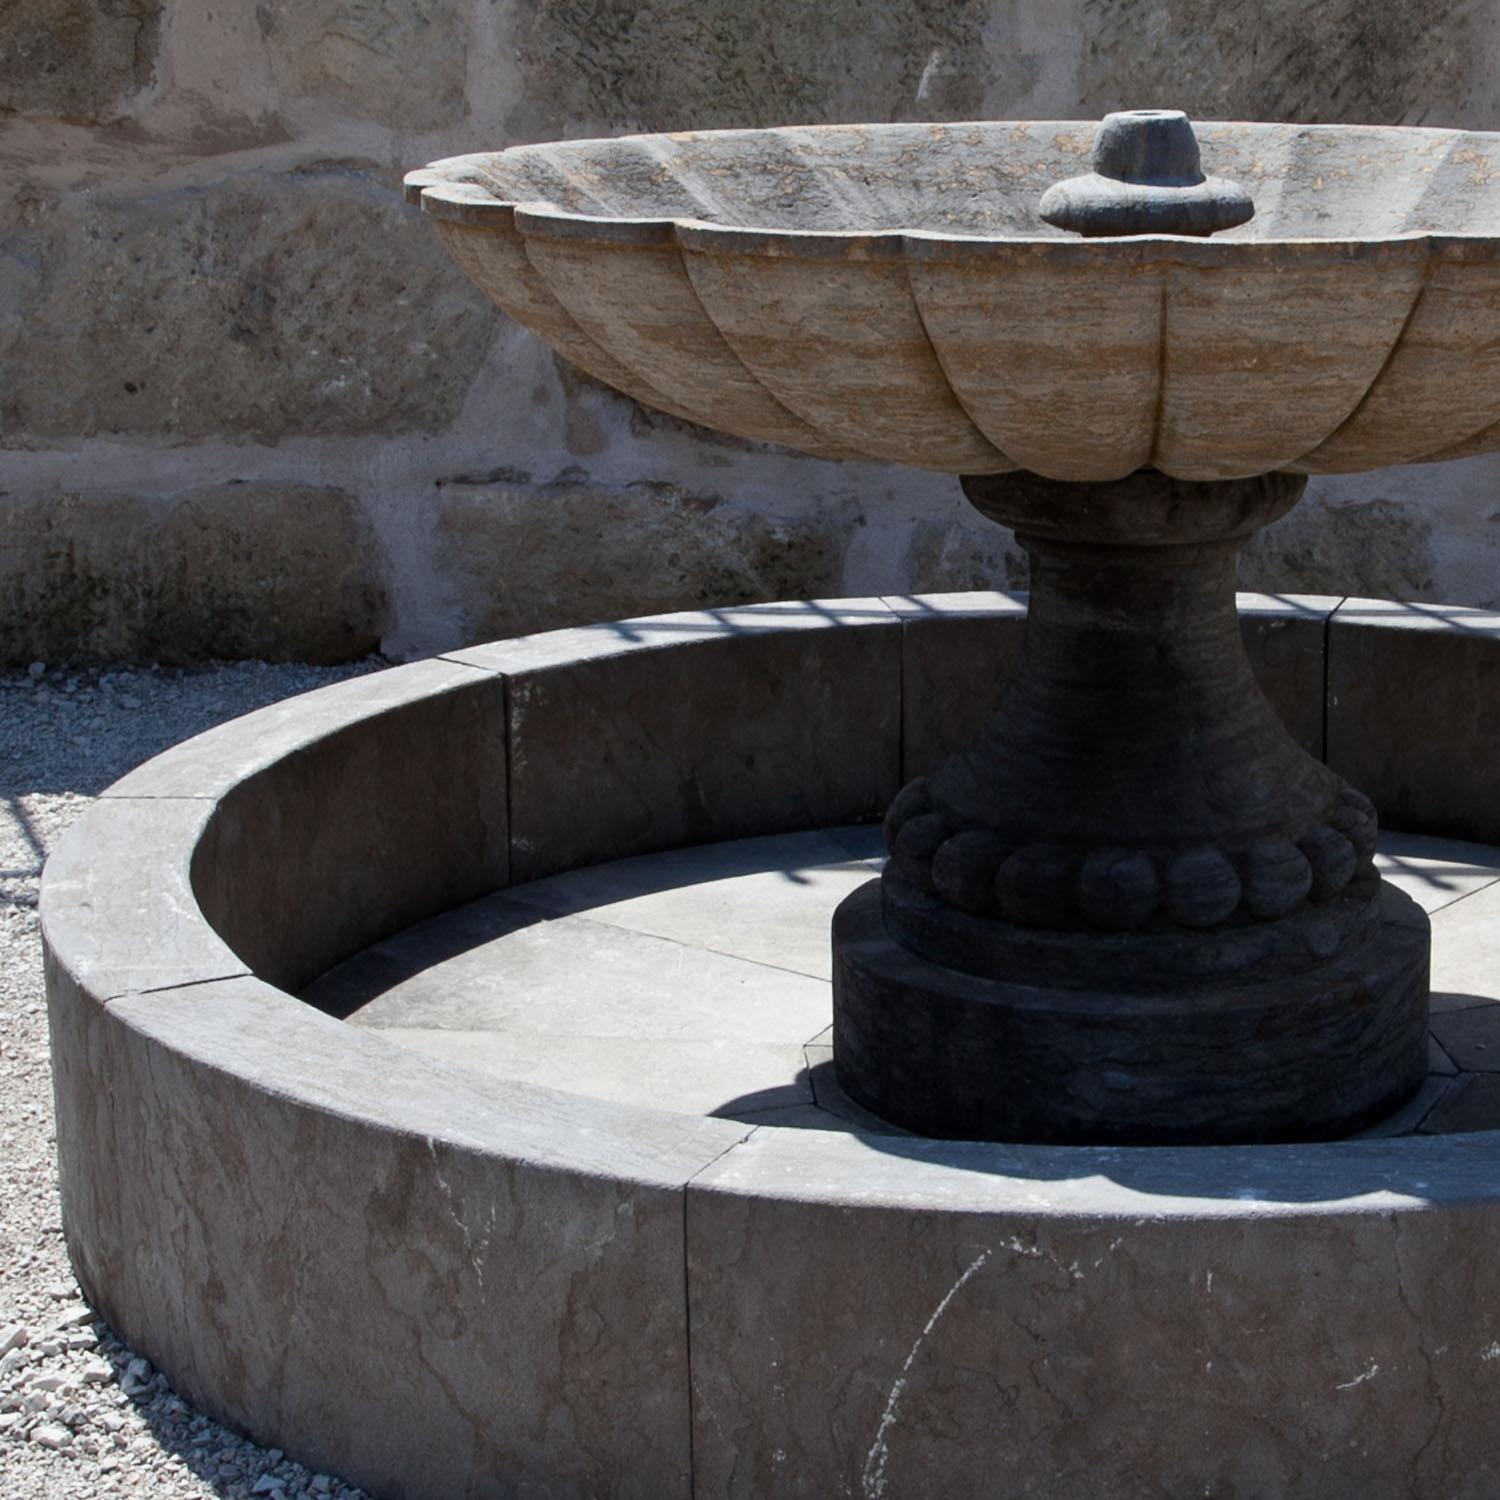 Round fountain with a short basin wall (H: 32 cm) and an extraordinary central column. The column stands on a darker baluster-shaped base and has a large scalloped basin (H: 89 x Ø140 cm). The fountain is hand-carved out of bluestone.